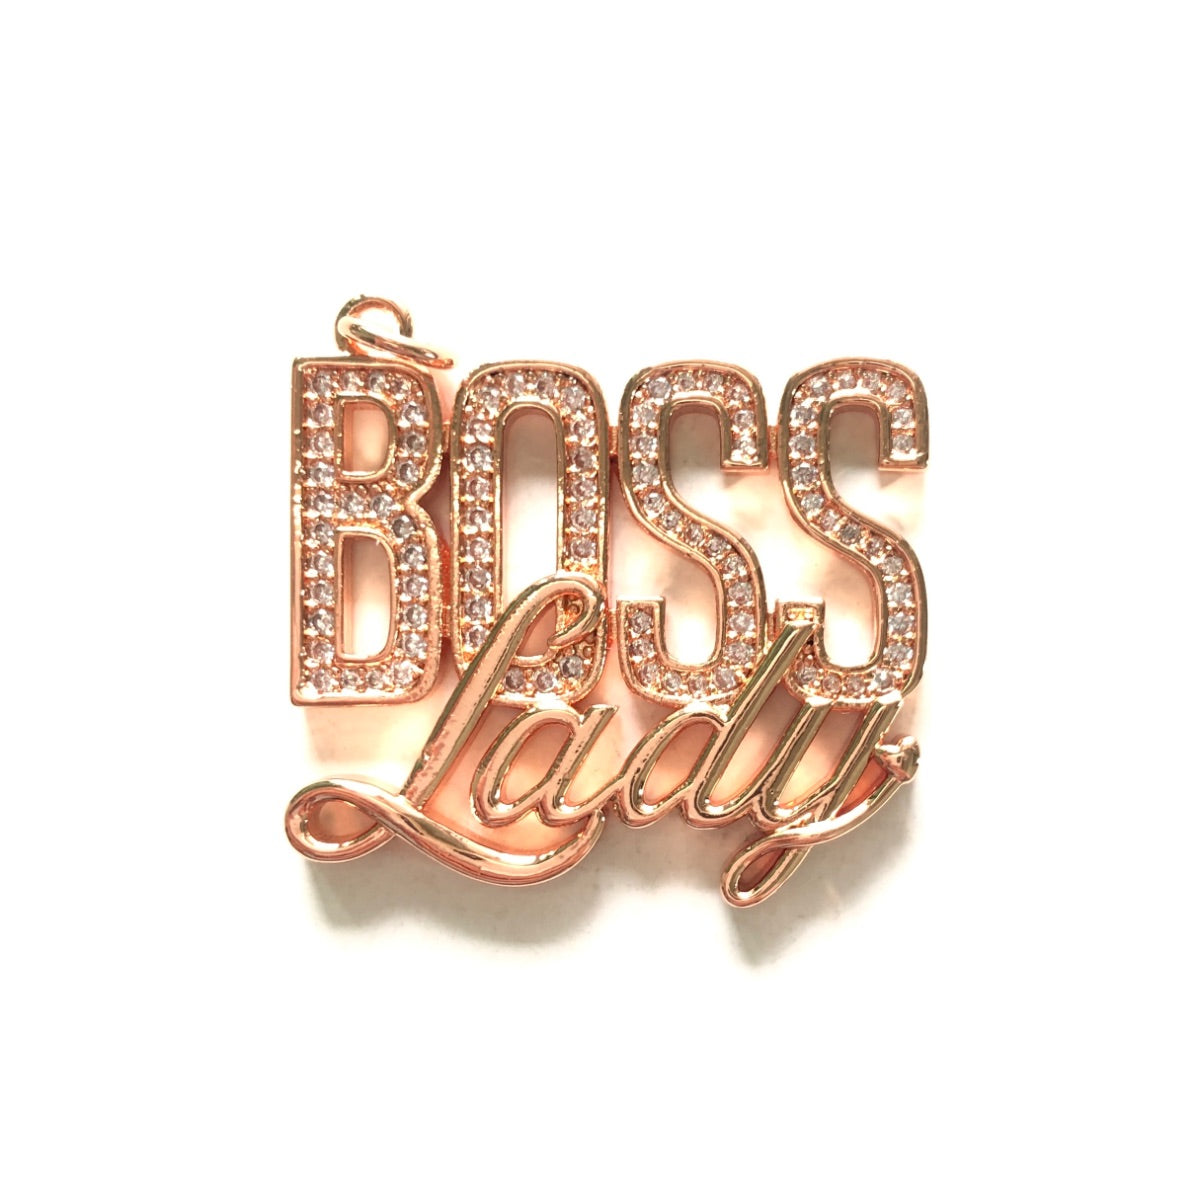 10pcs/lot 31*27.5mm CZ Pave Boss Lady Word Charms Rose Gold CZ Paved Charms New Charms Arrivals Words & Quotes Charms Beads Beyond